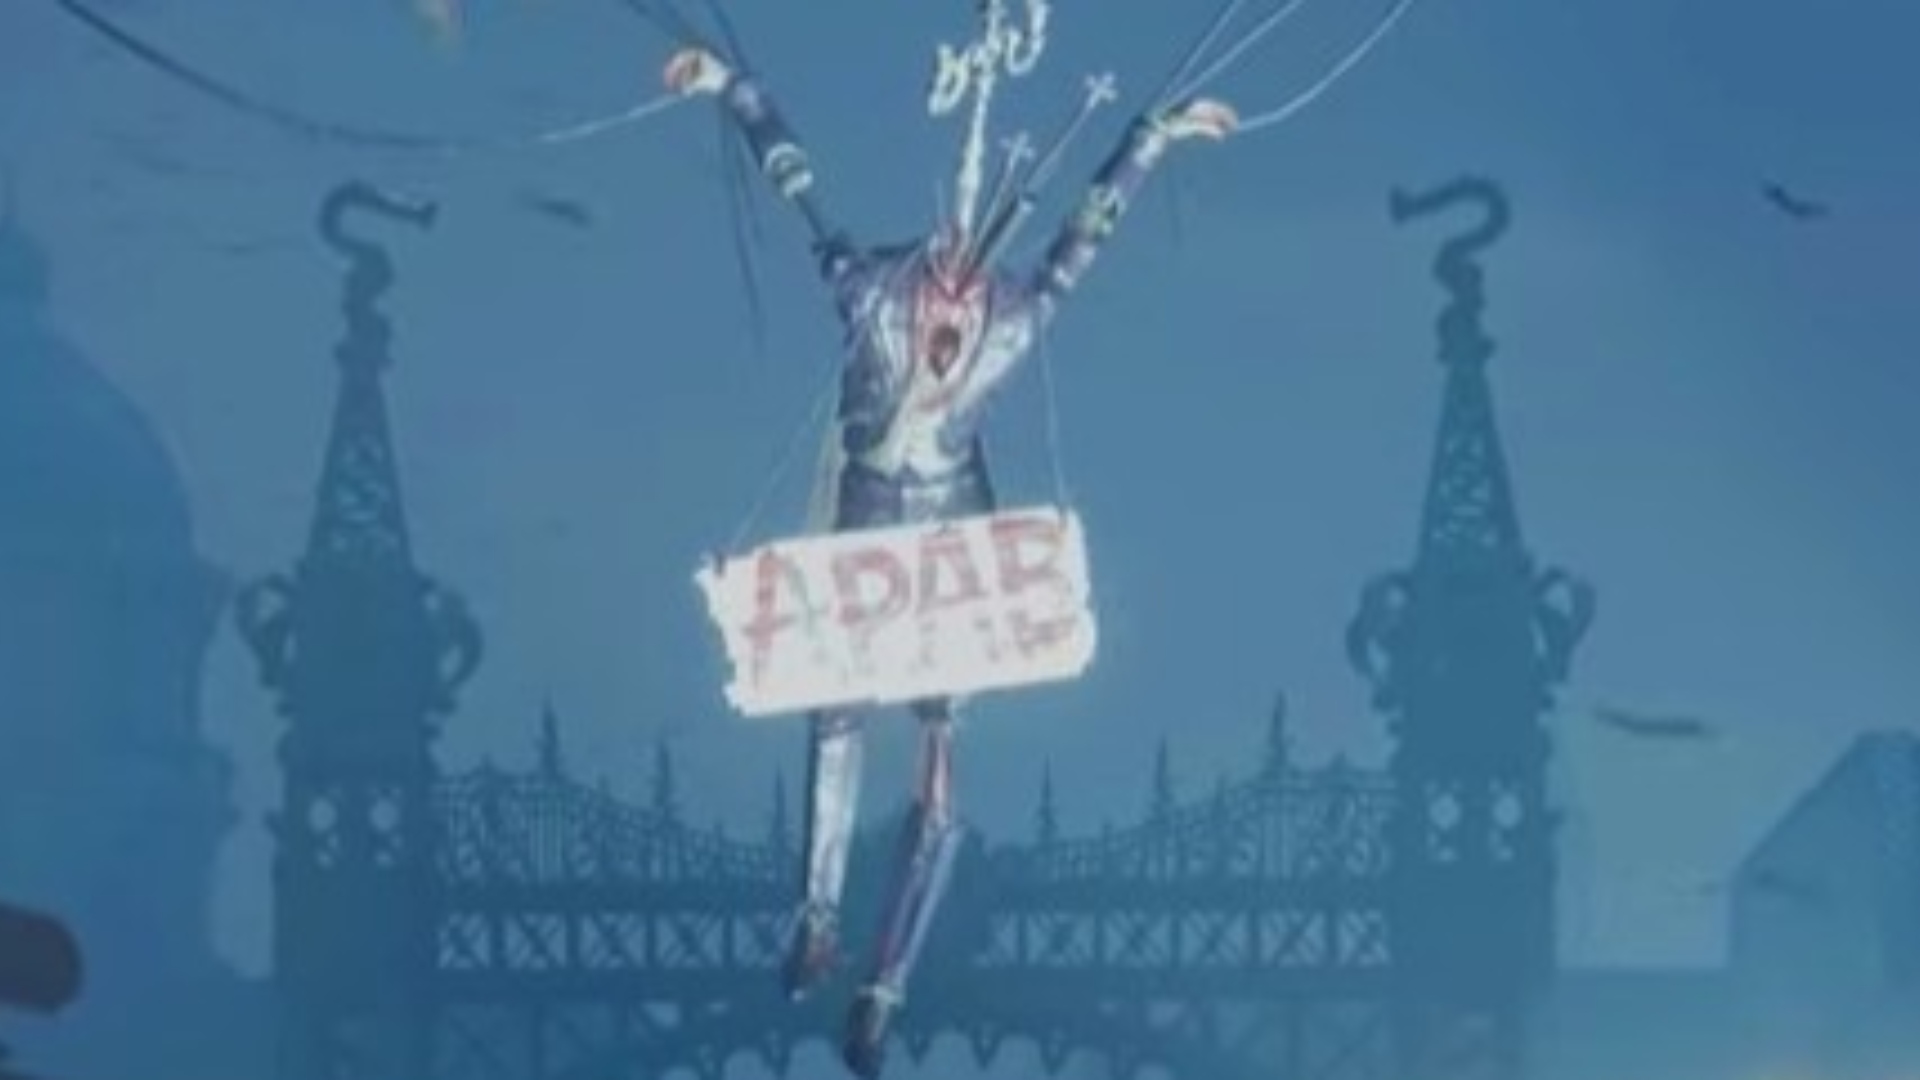 Lies of P cut content: A marionette from soulslike RPG game Lies of P wearing a message that references ACAB